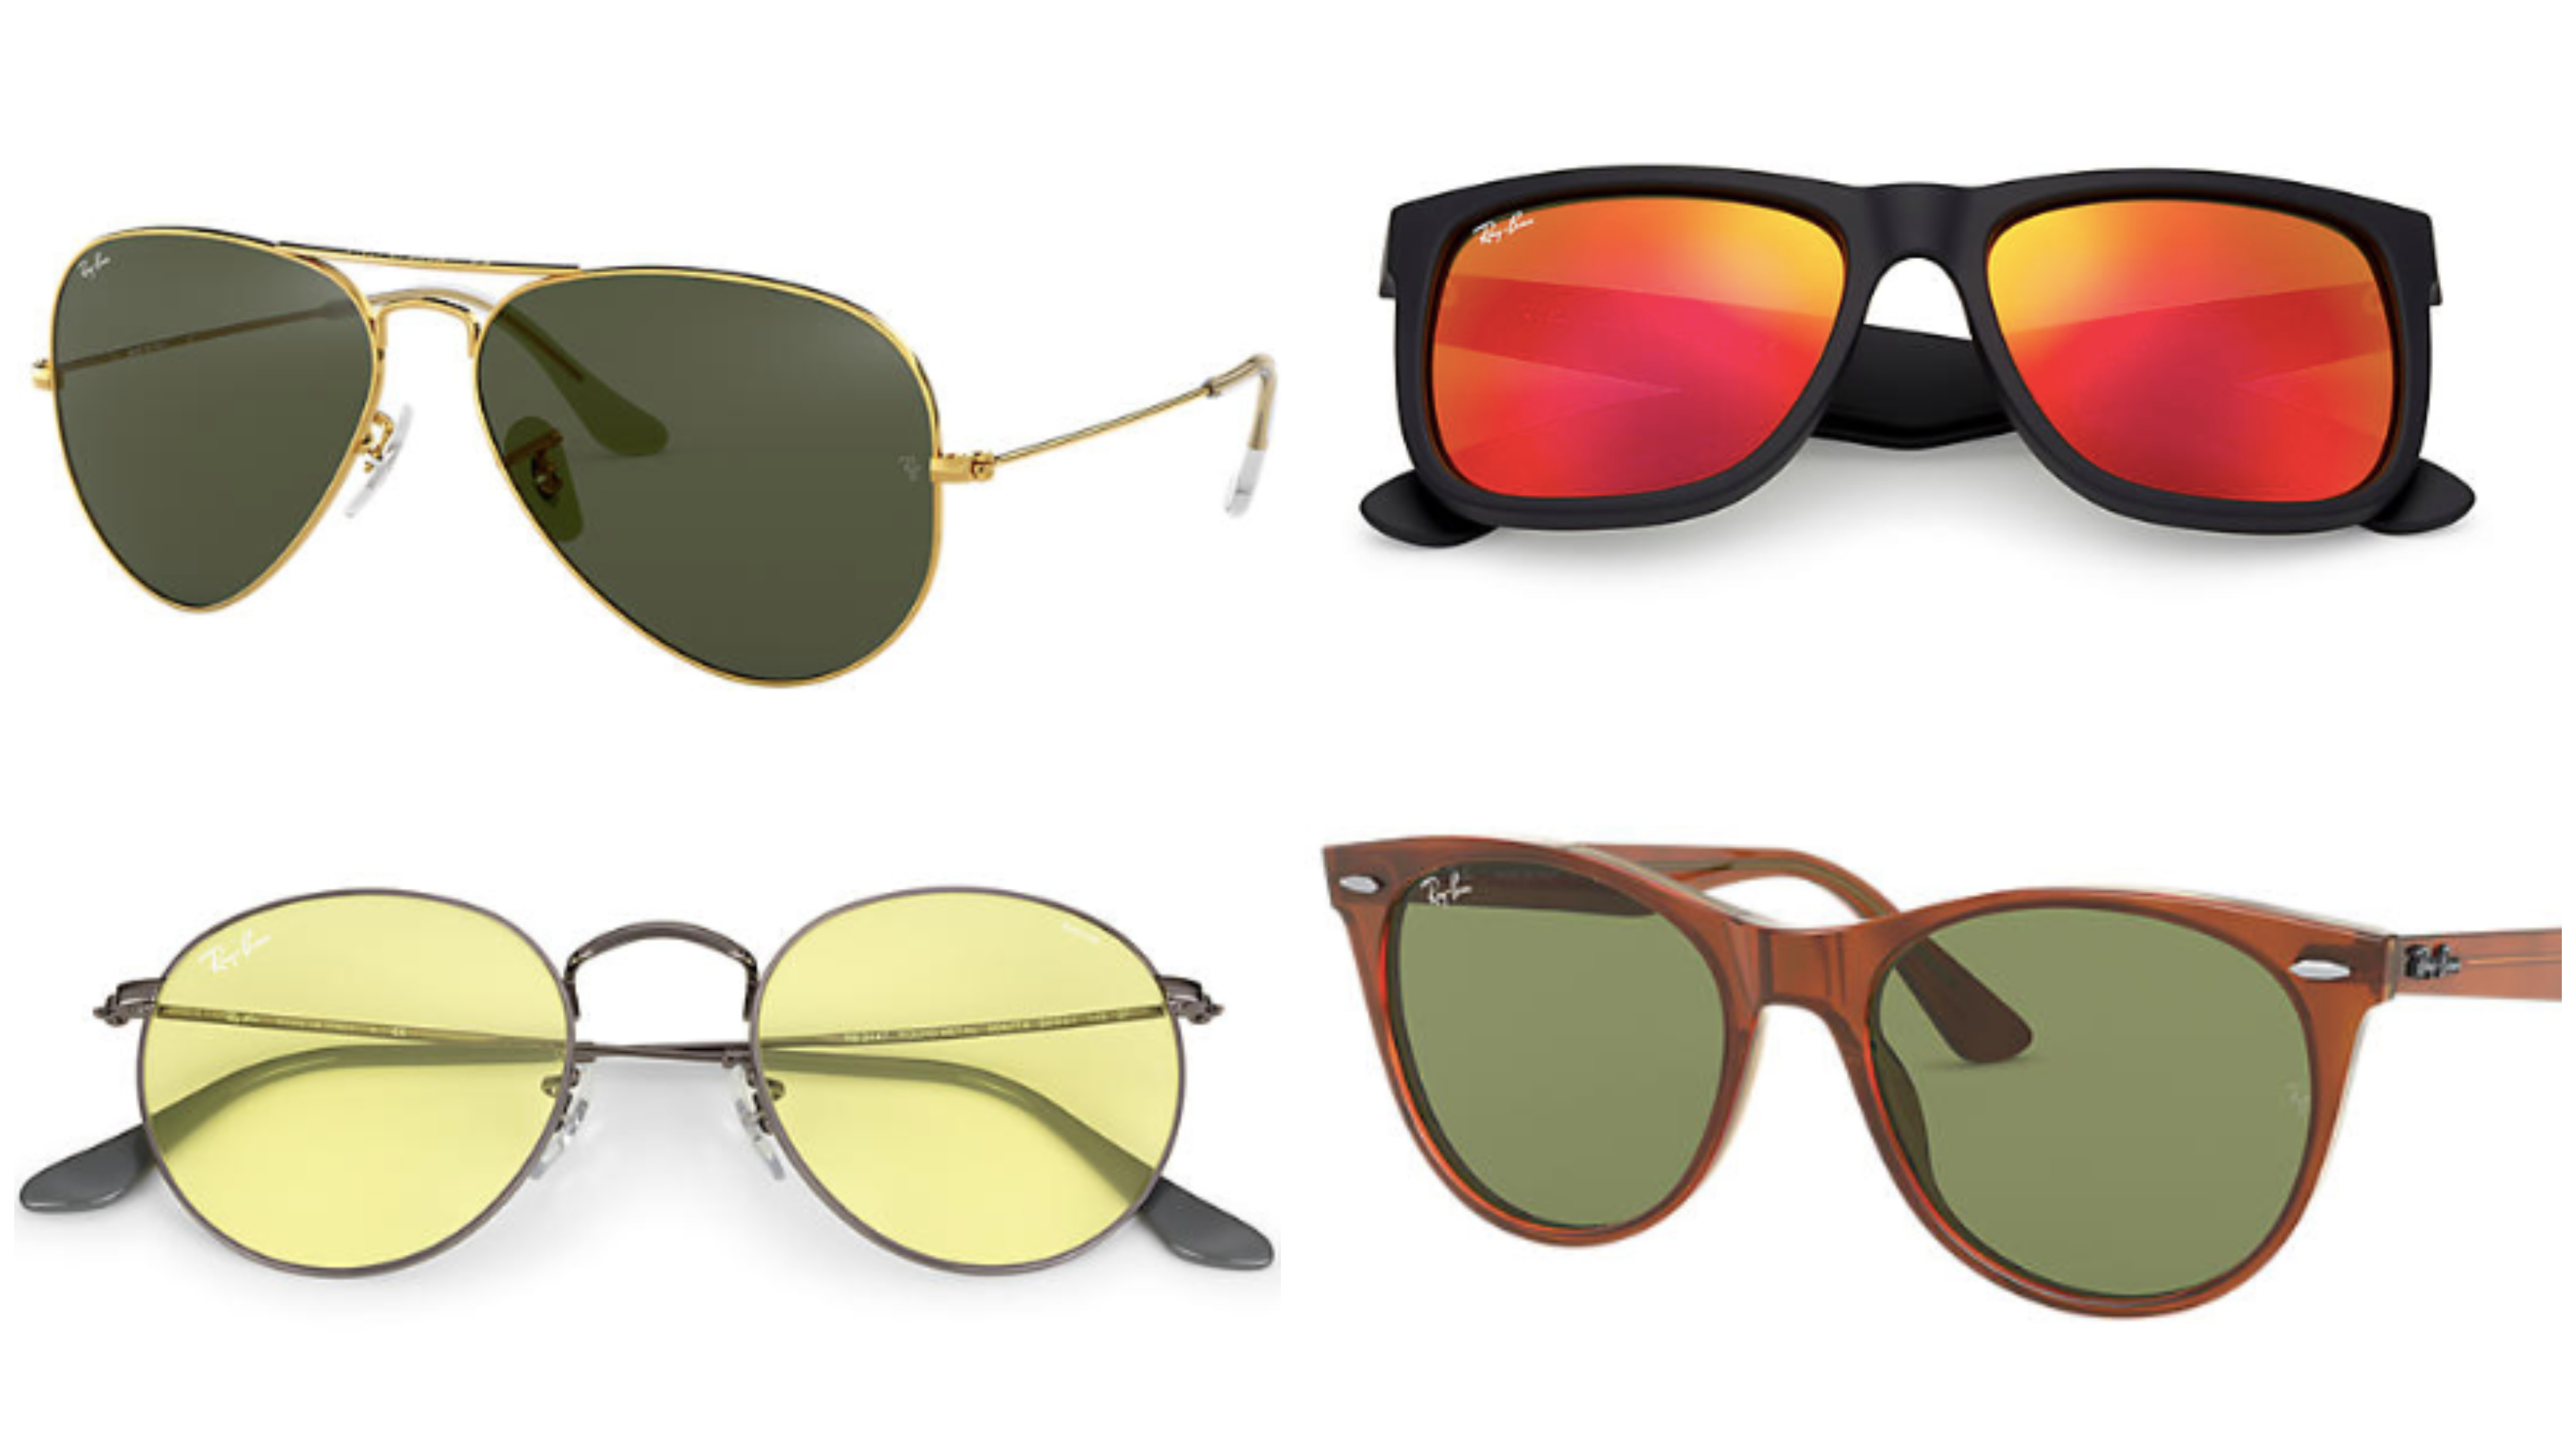 Overleven hurken Politiek Ray-Ban Sale - Save 30% Off All Ray-Ban Shades Right Now - BroBible